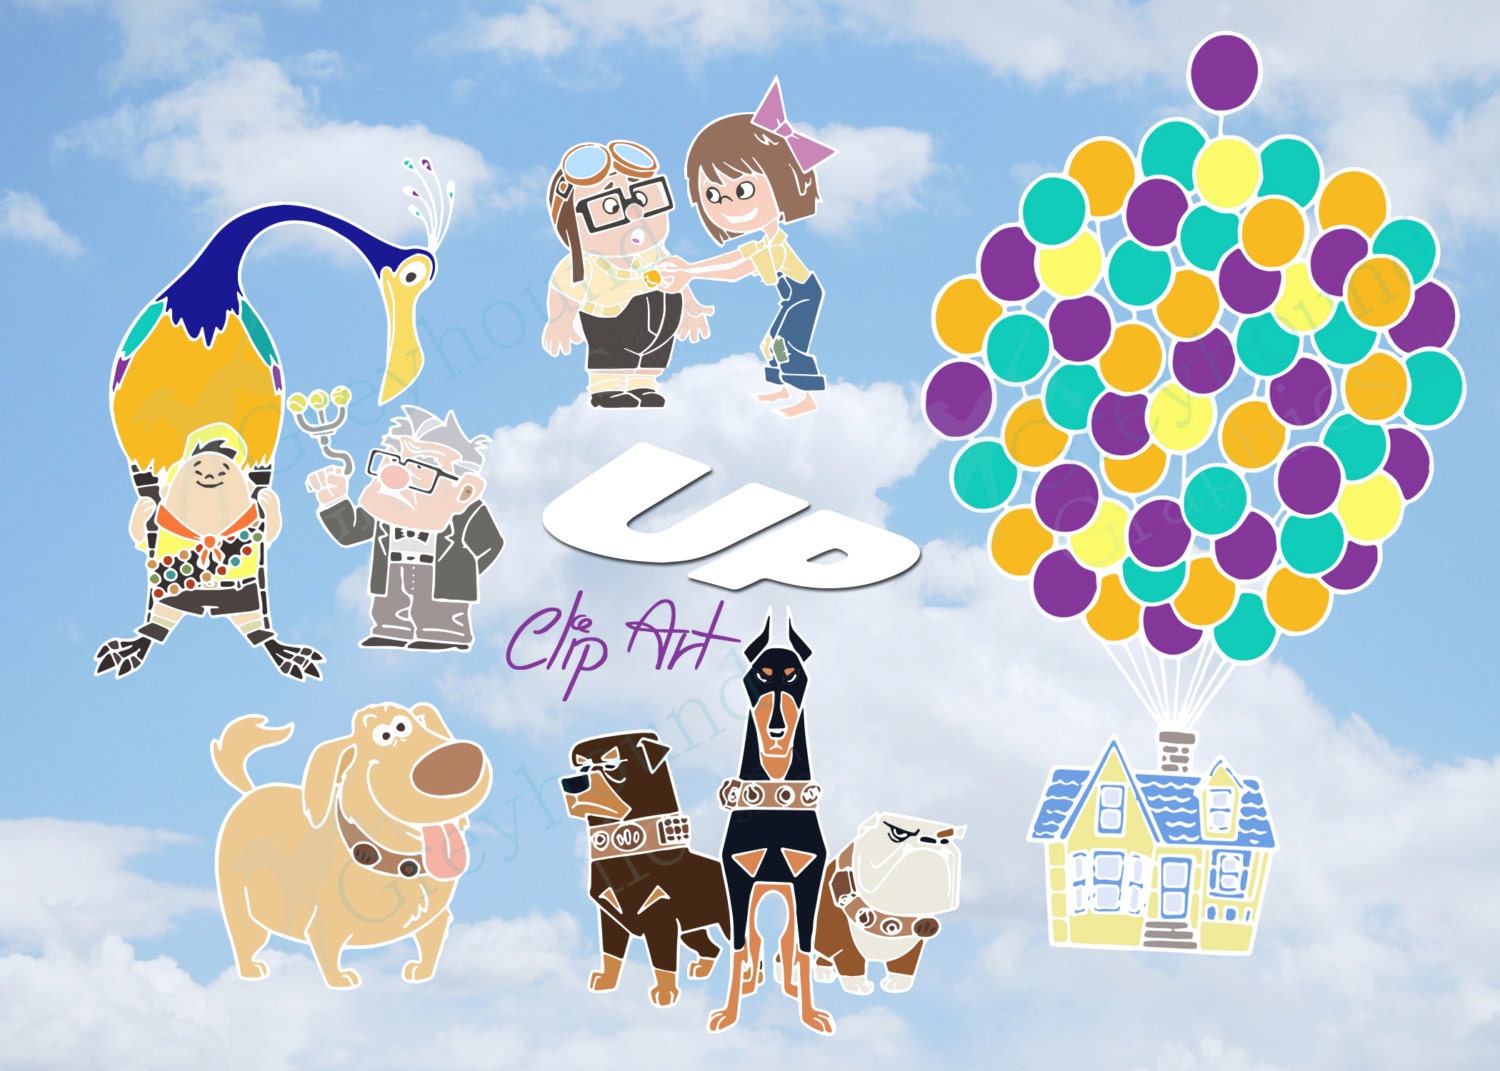 up house clipart - photo #23